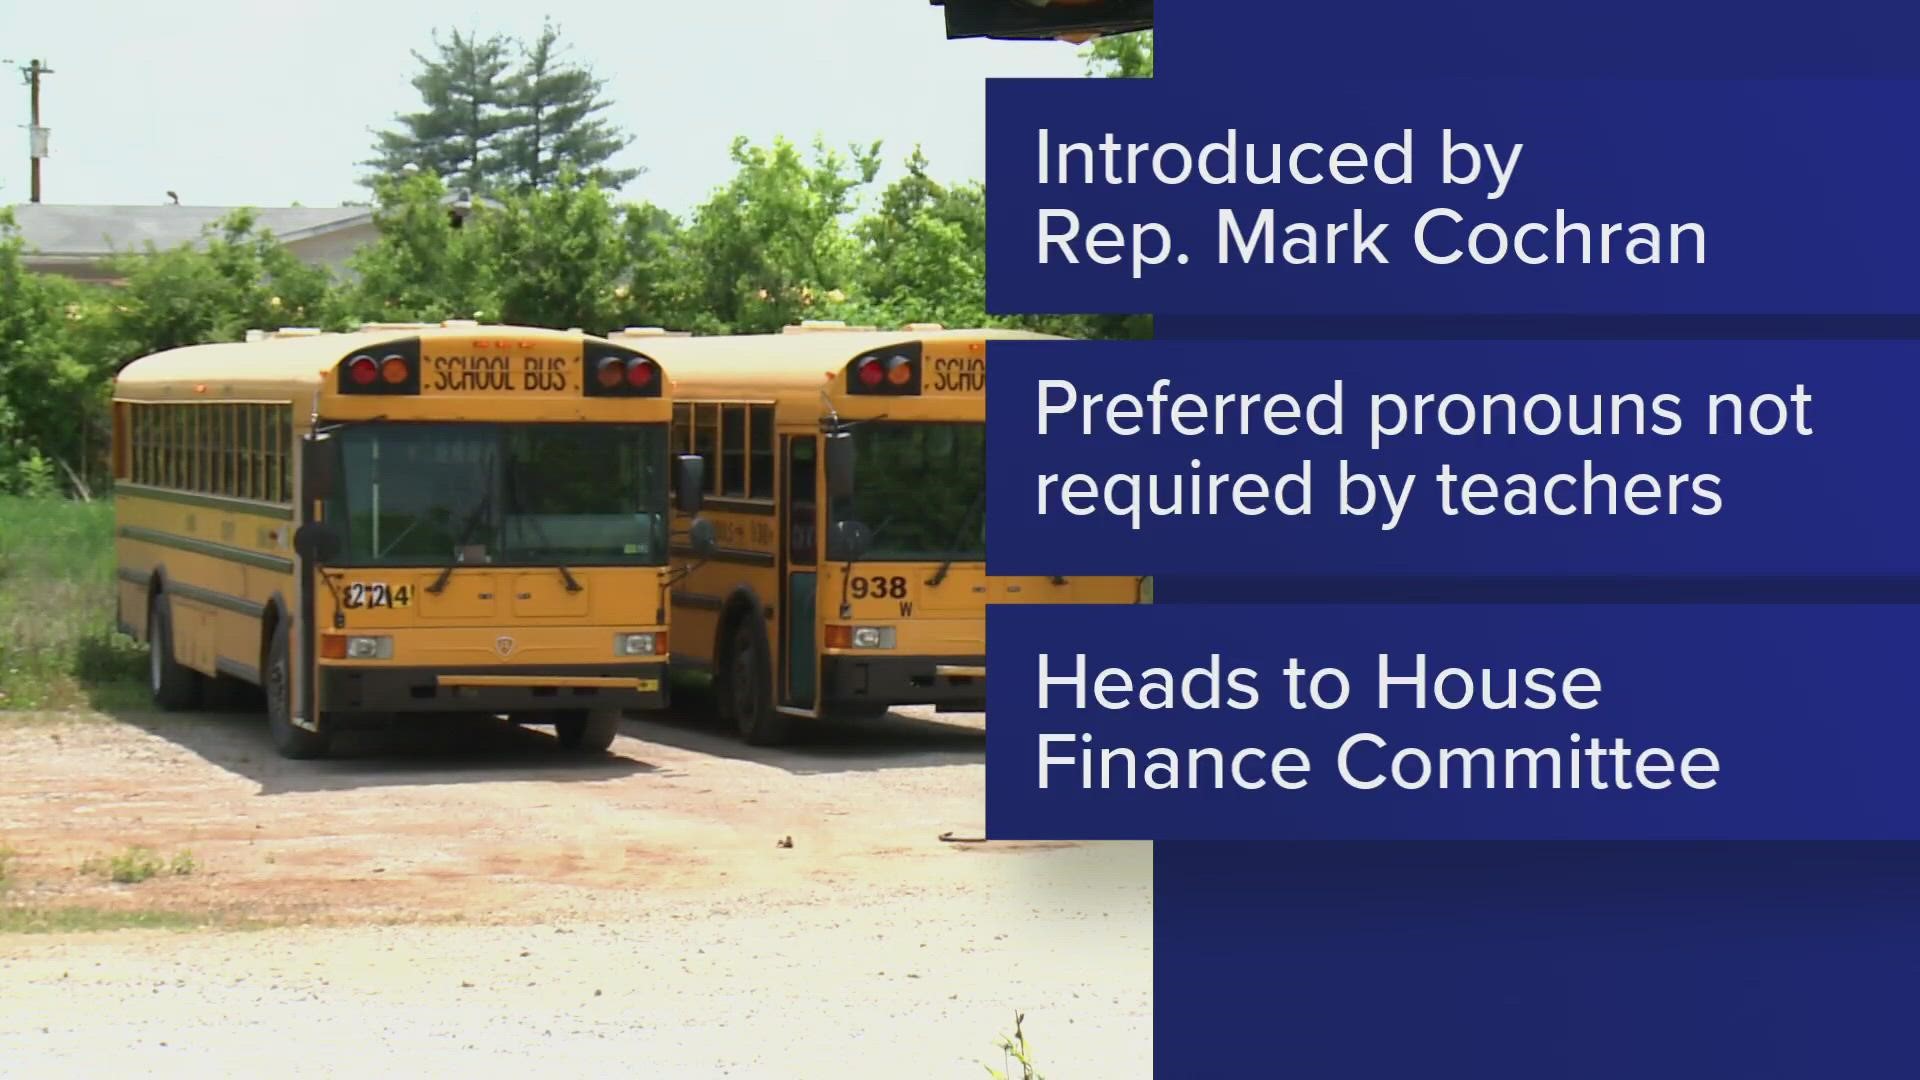 The bill, HB 1269, was introduced by Rep. Mark Cochran (R - Englewood).